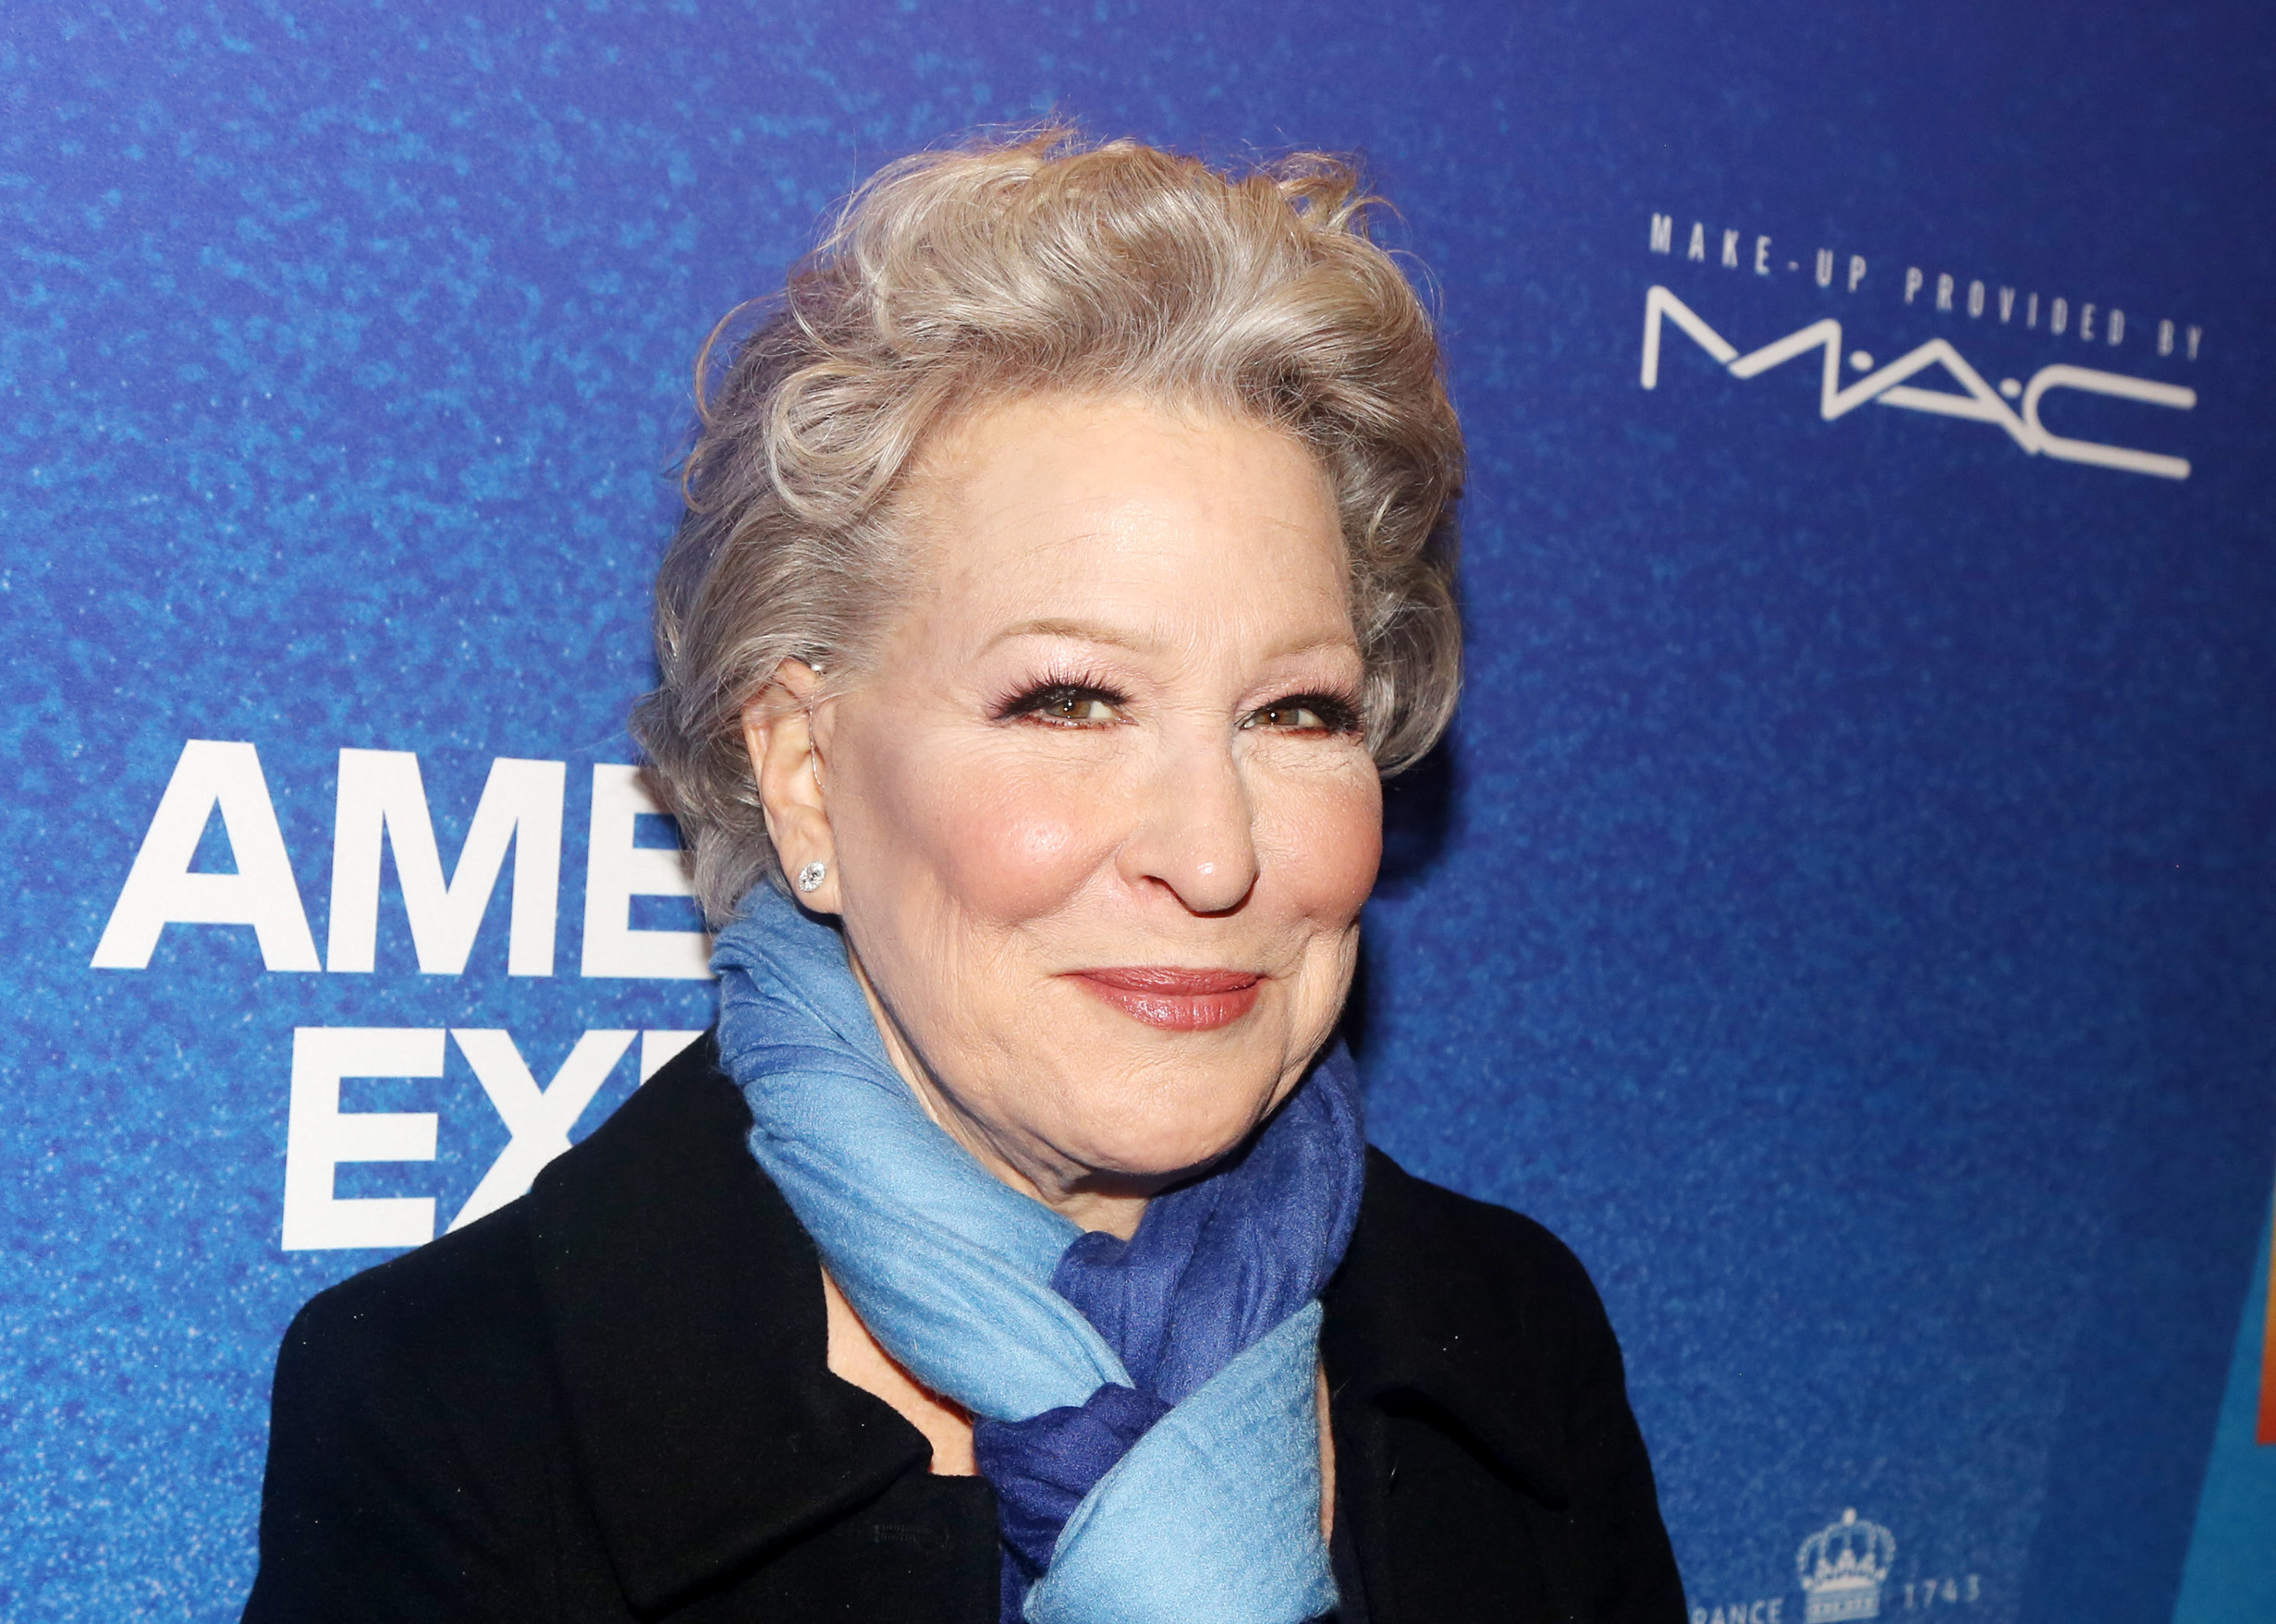 Bette Midler Melts Down Over Losing Blue Check On Twitter: ‘Contributed Mightily To Your Platform’